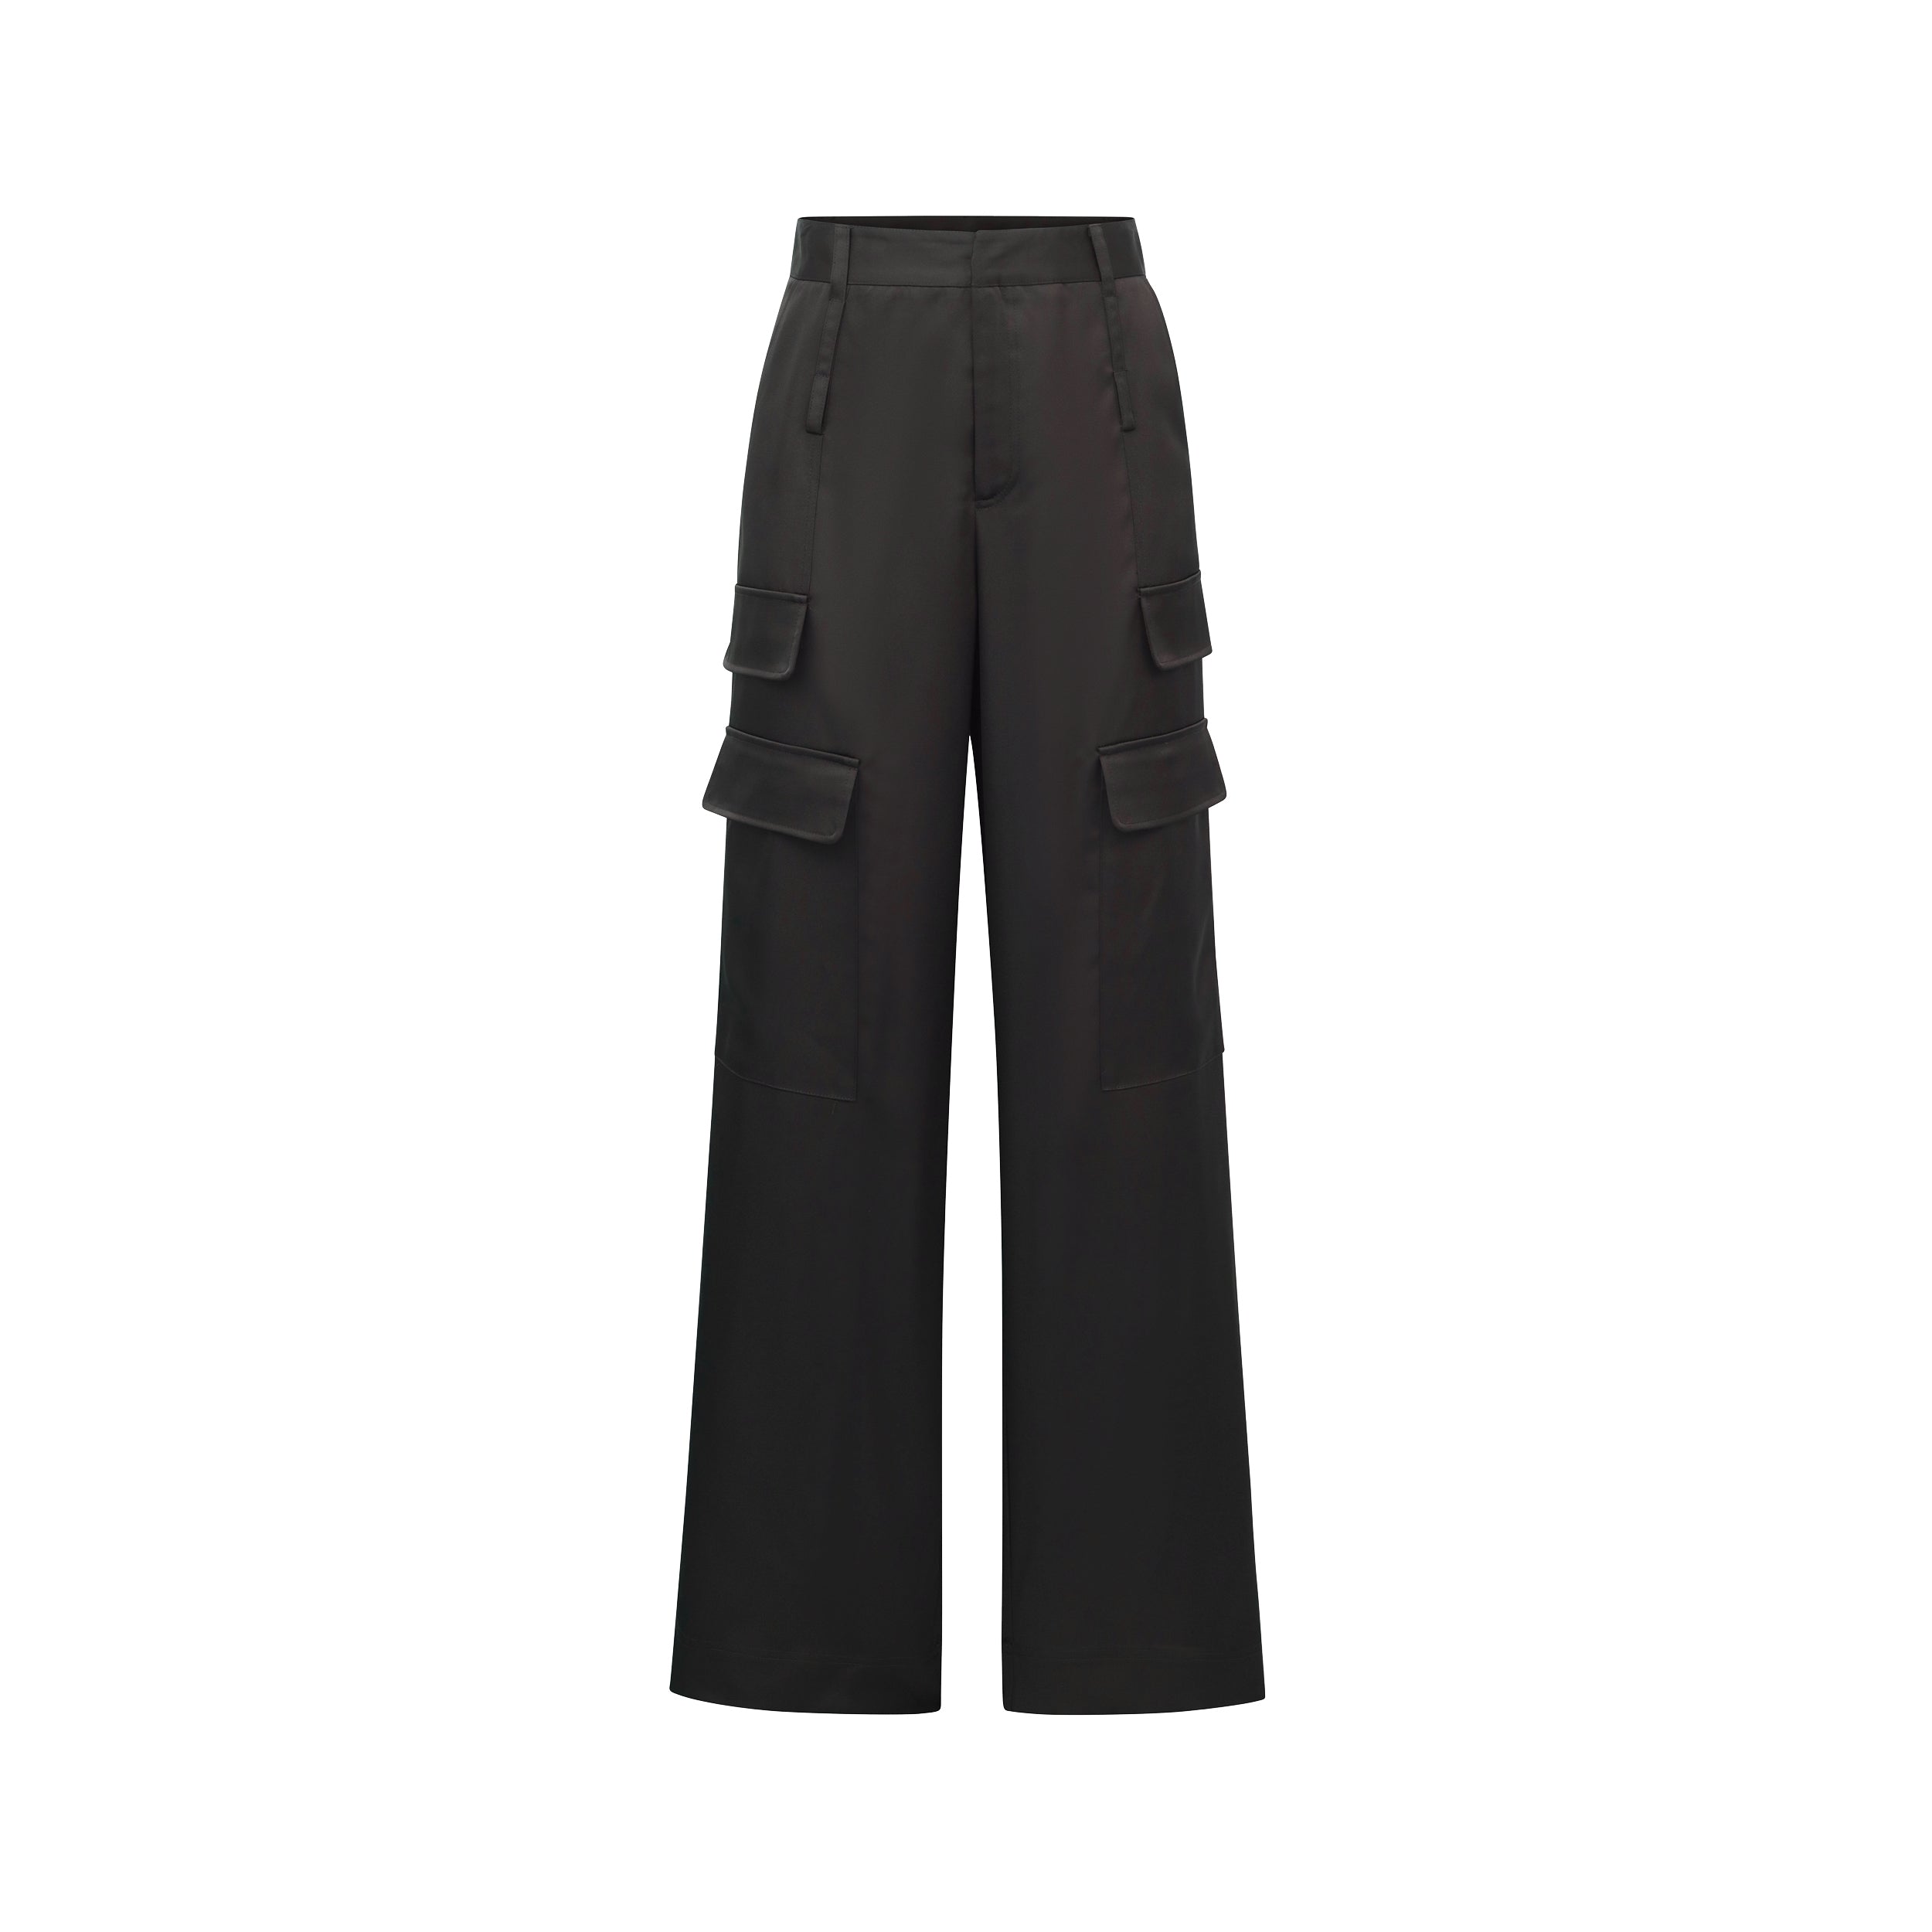 Product view of Black Satin Milan Pant features Mid-rise with side pockets and cargo detail. Luxurious and structured satin-like fabric. 